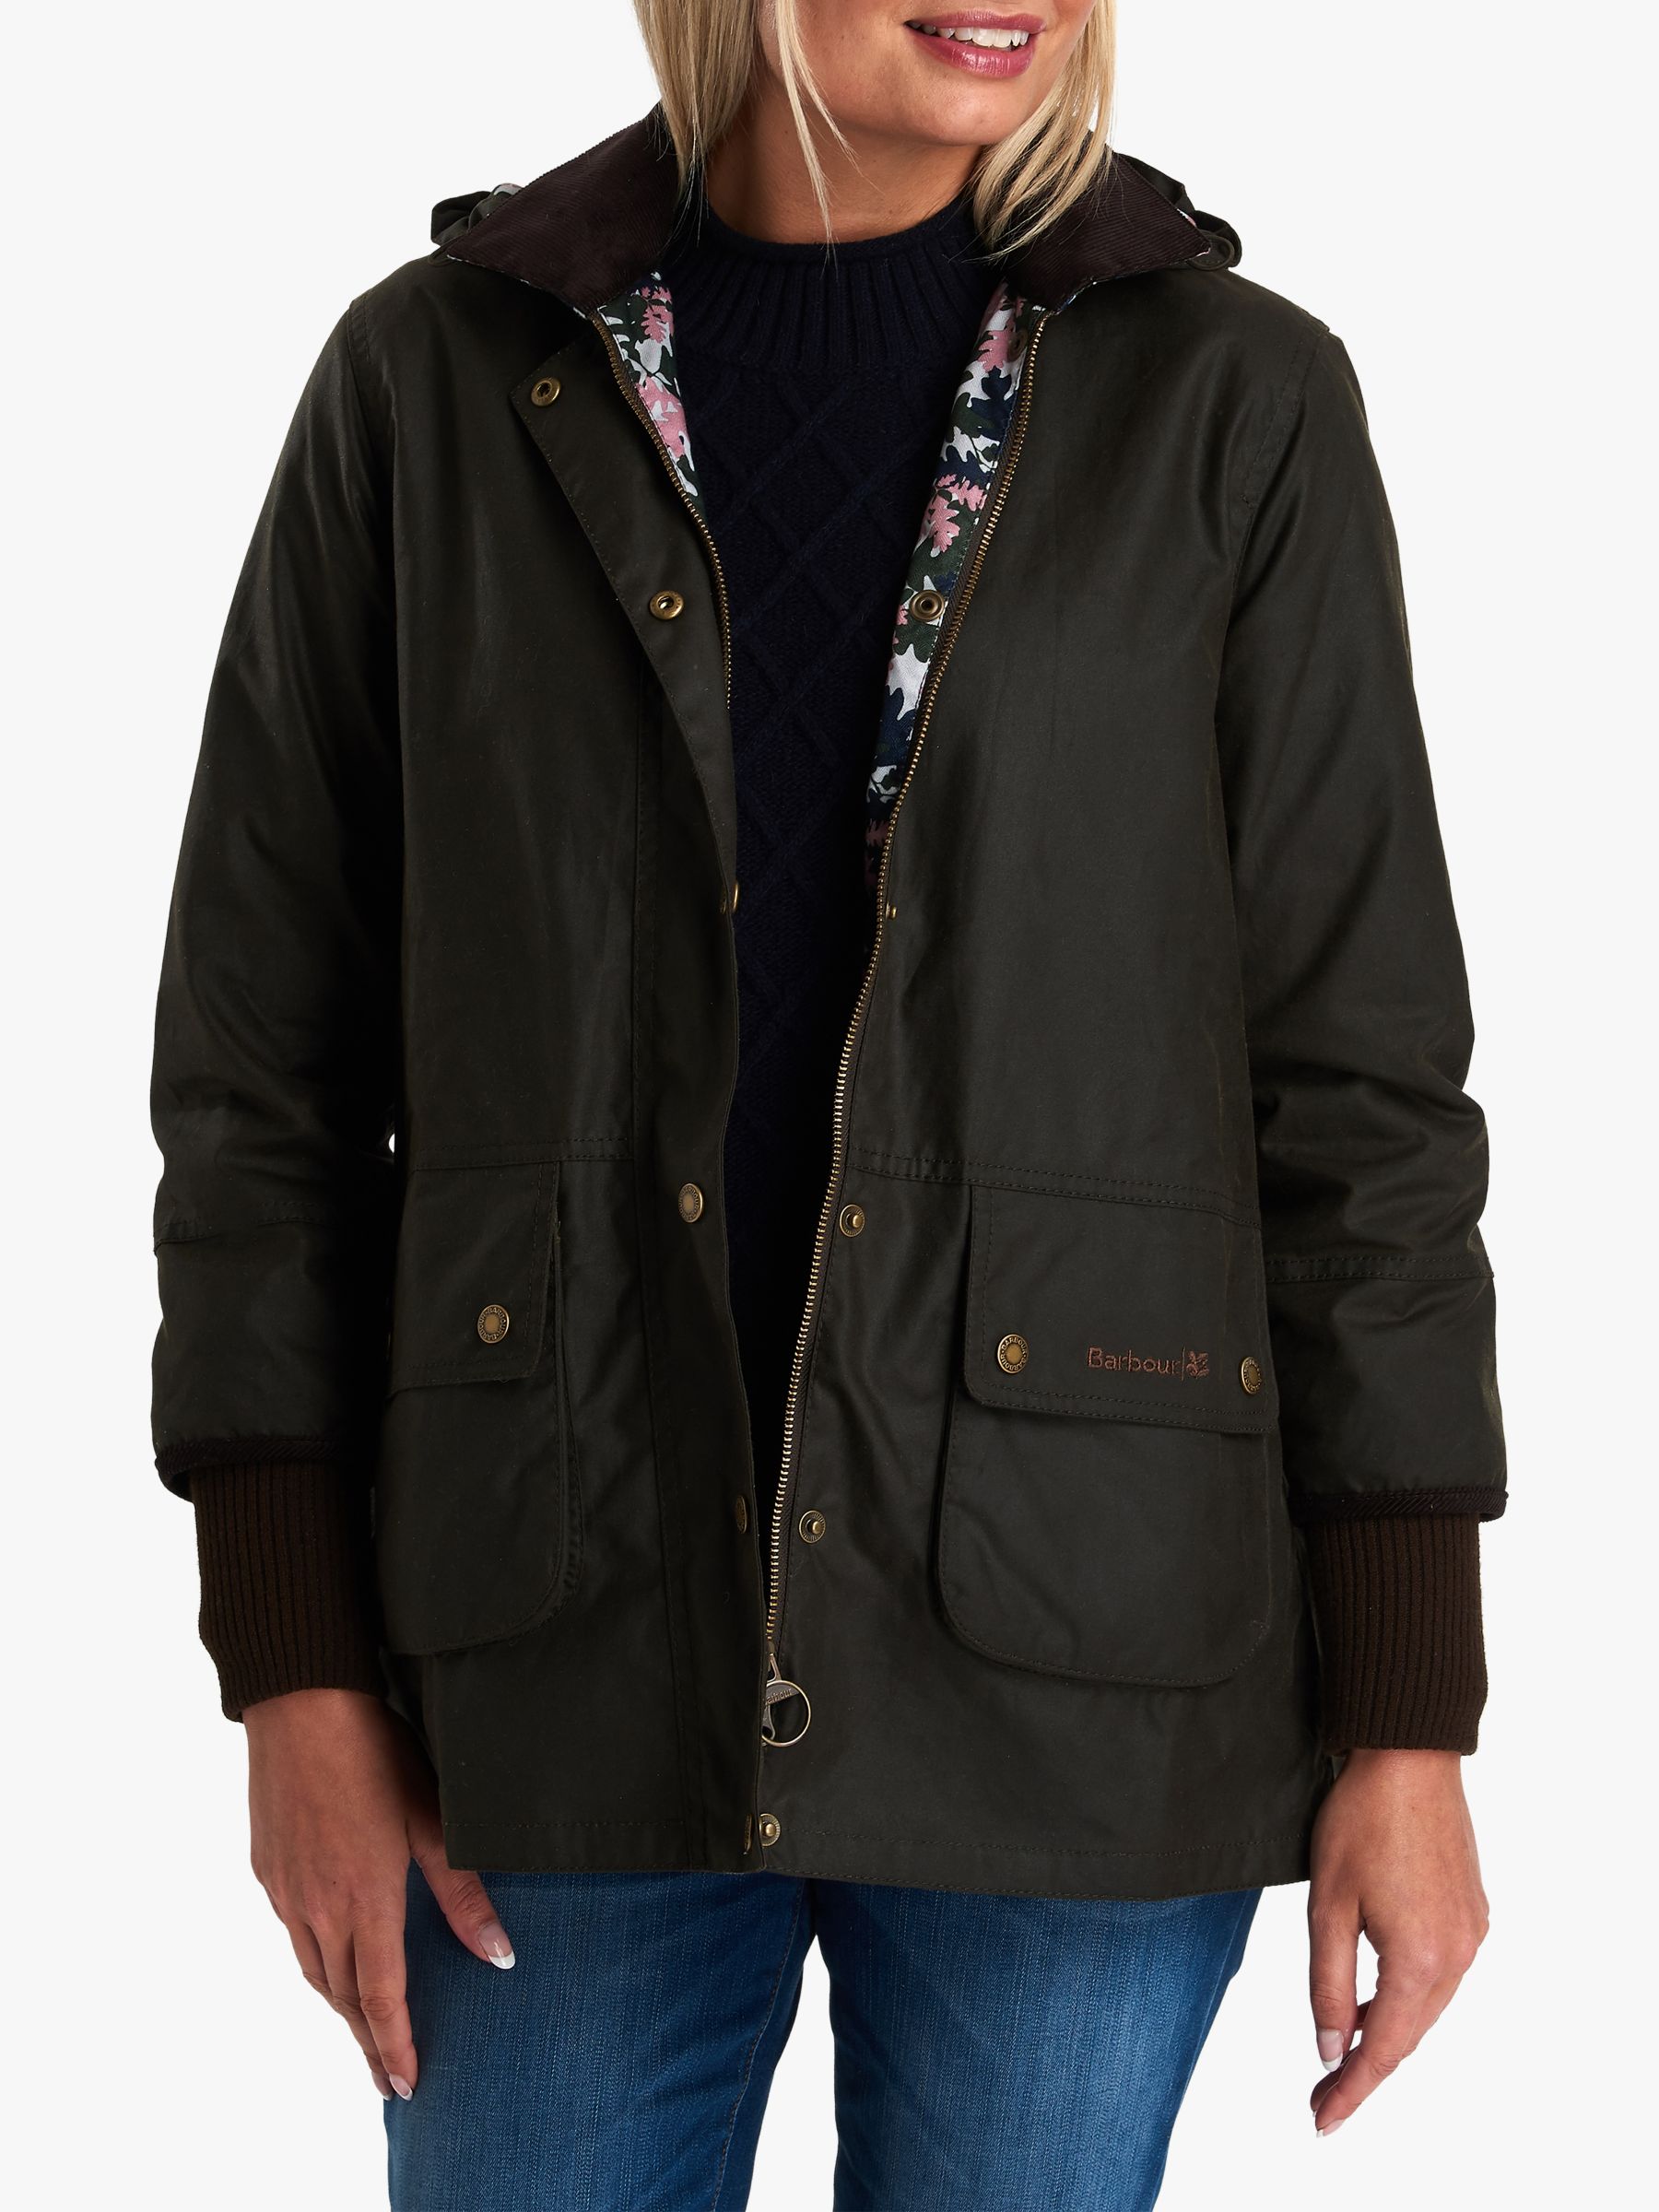 Barbour National Trust Dales Waxed Cotton Jacket, Olive, 12